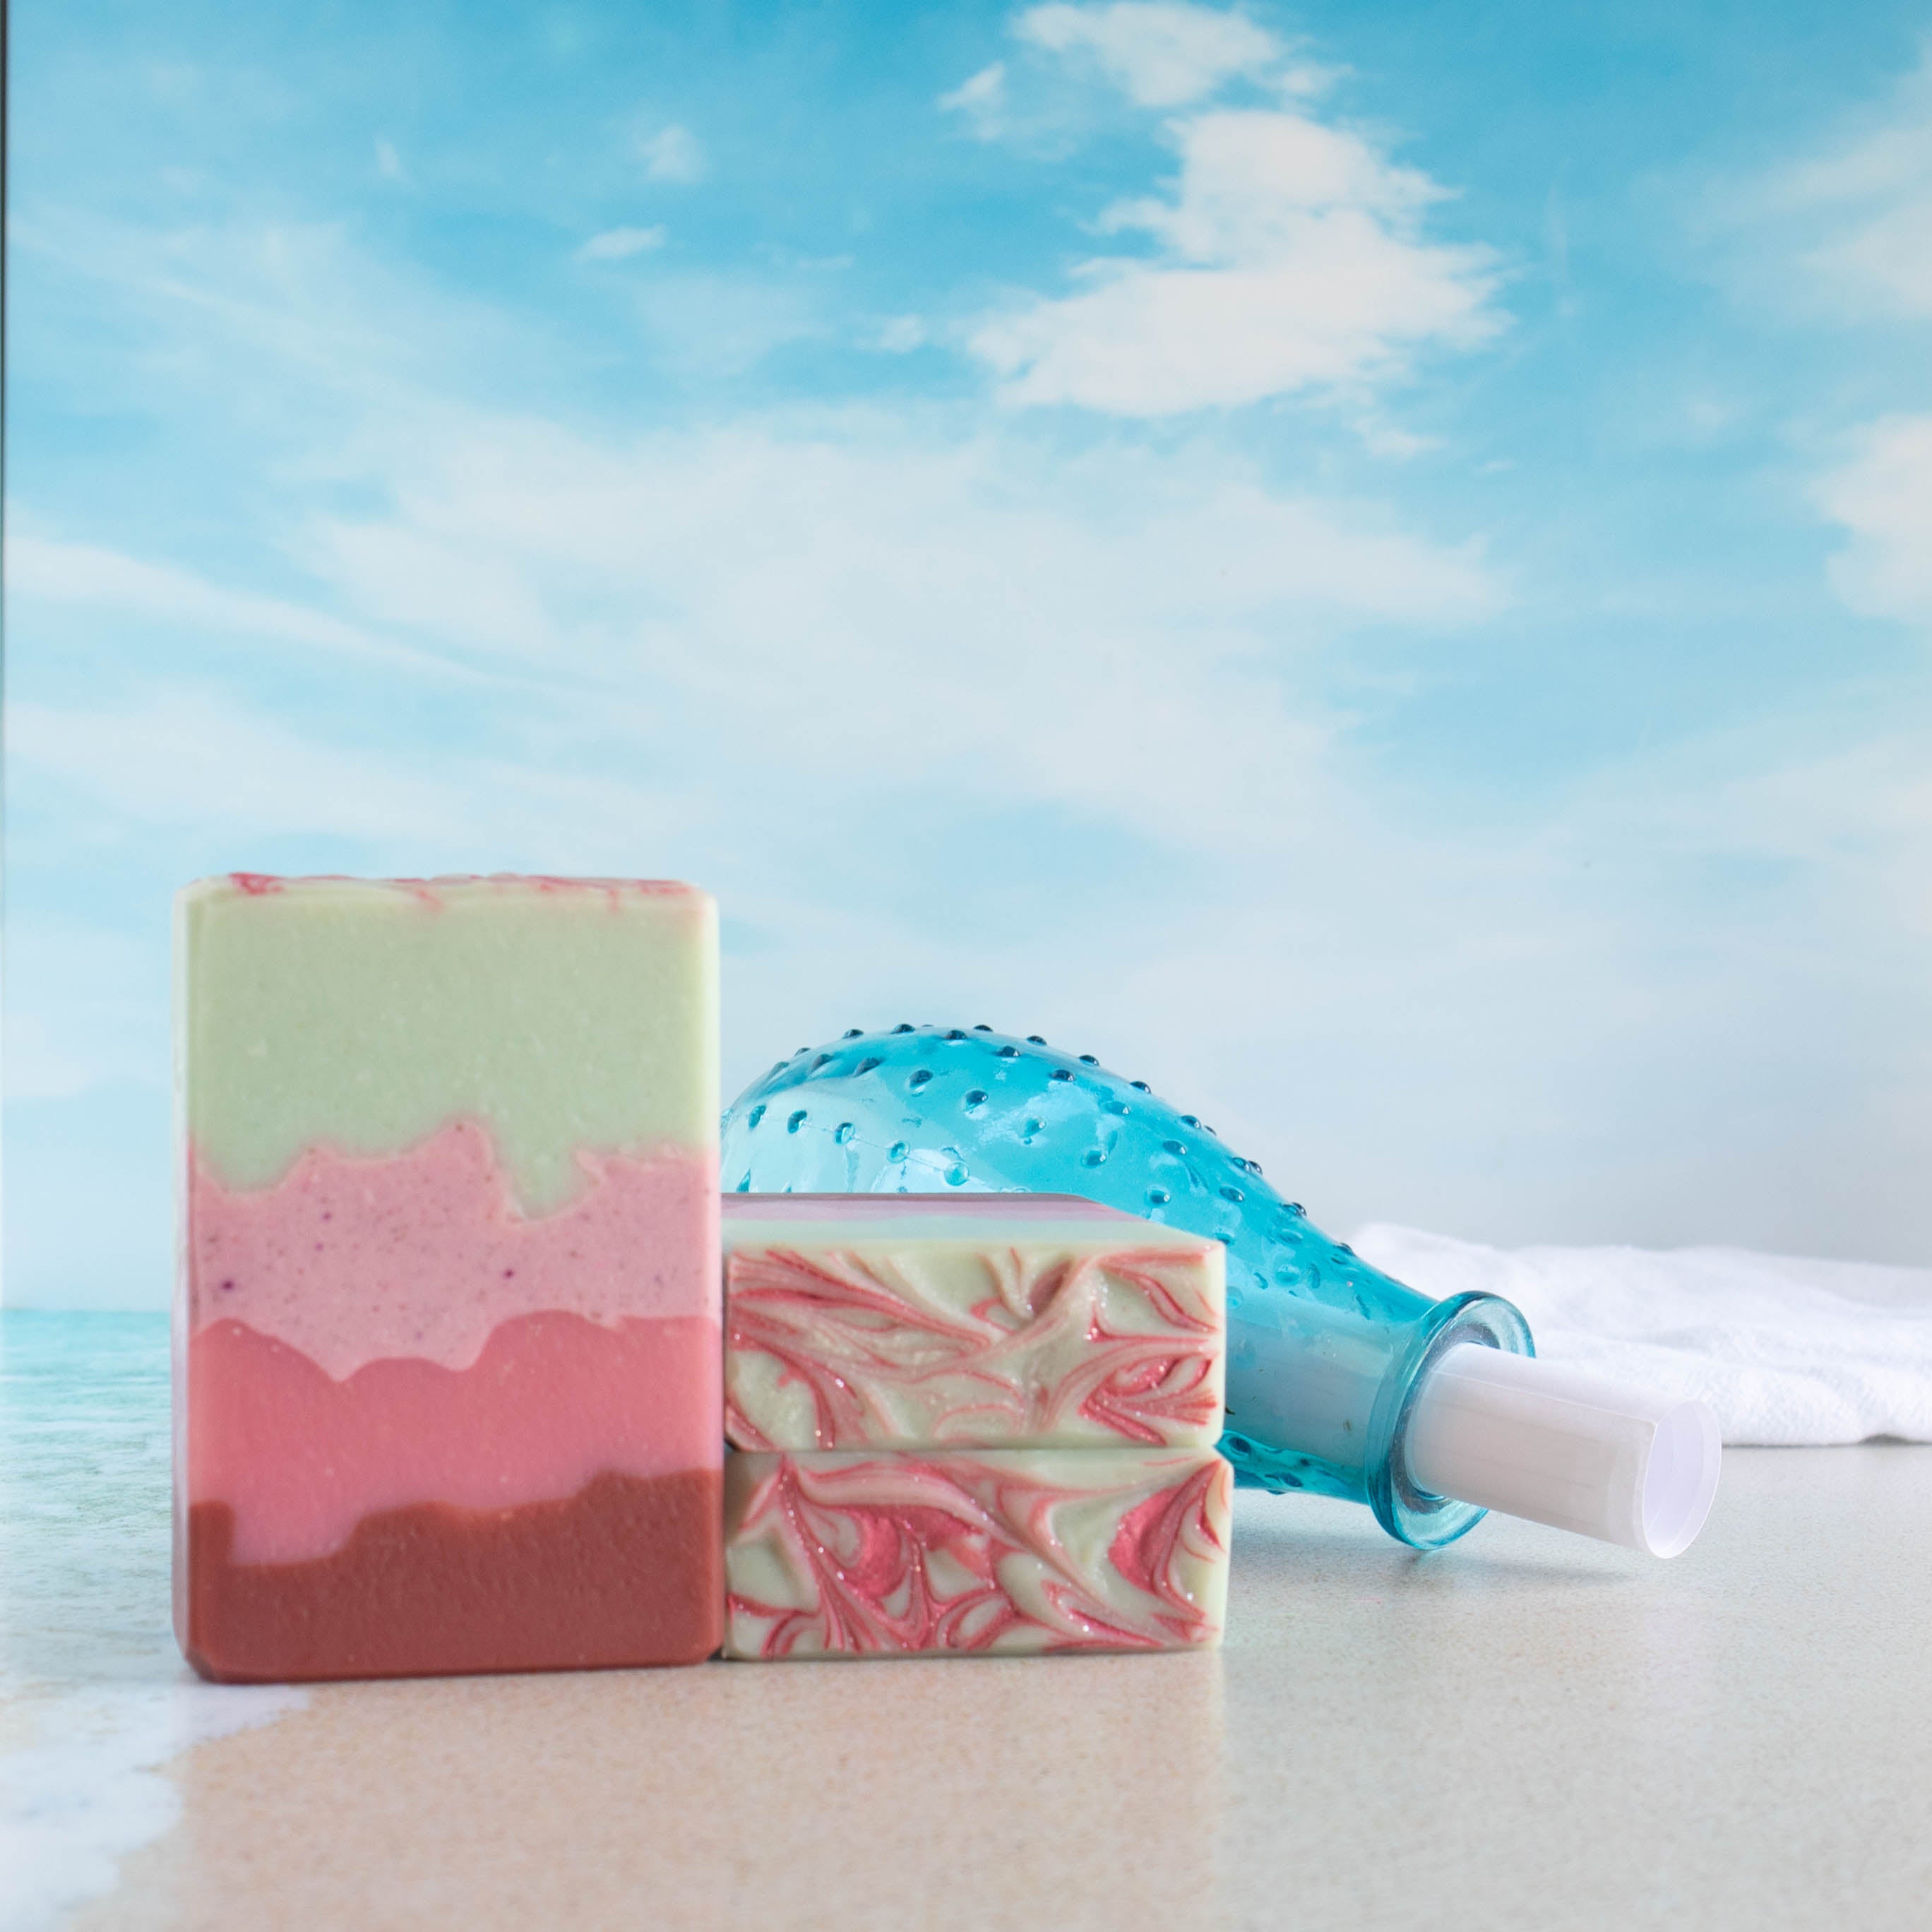 a pink sands soap is standing on a beach scene with waves lapping at its bottom. the soap has 3 pink layers starting dark to light from the bottom. the top layer is a pretty minty green. 2 soaps are laying flat to show a pretty pink swirl on the green top soap. there is a bottle in the background with a letter sticking out of it.